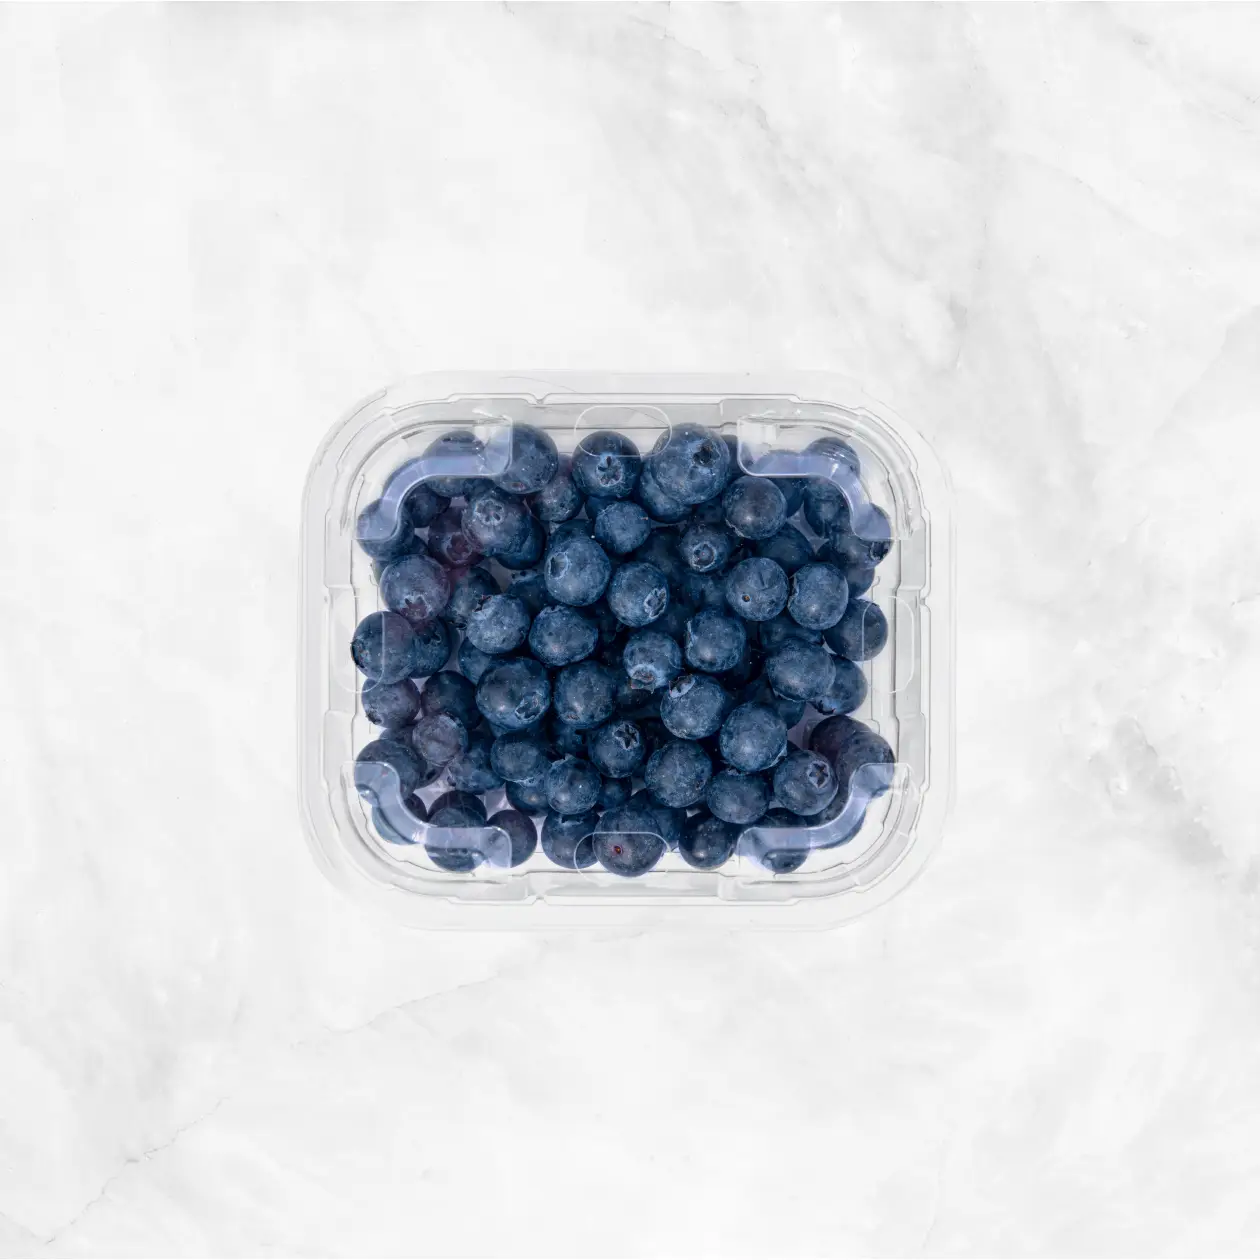 Organic Blueberries Delivery